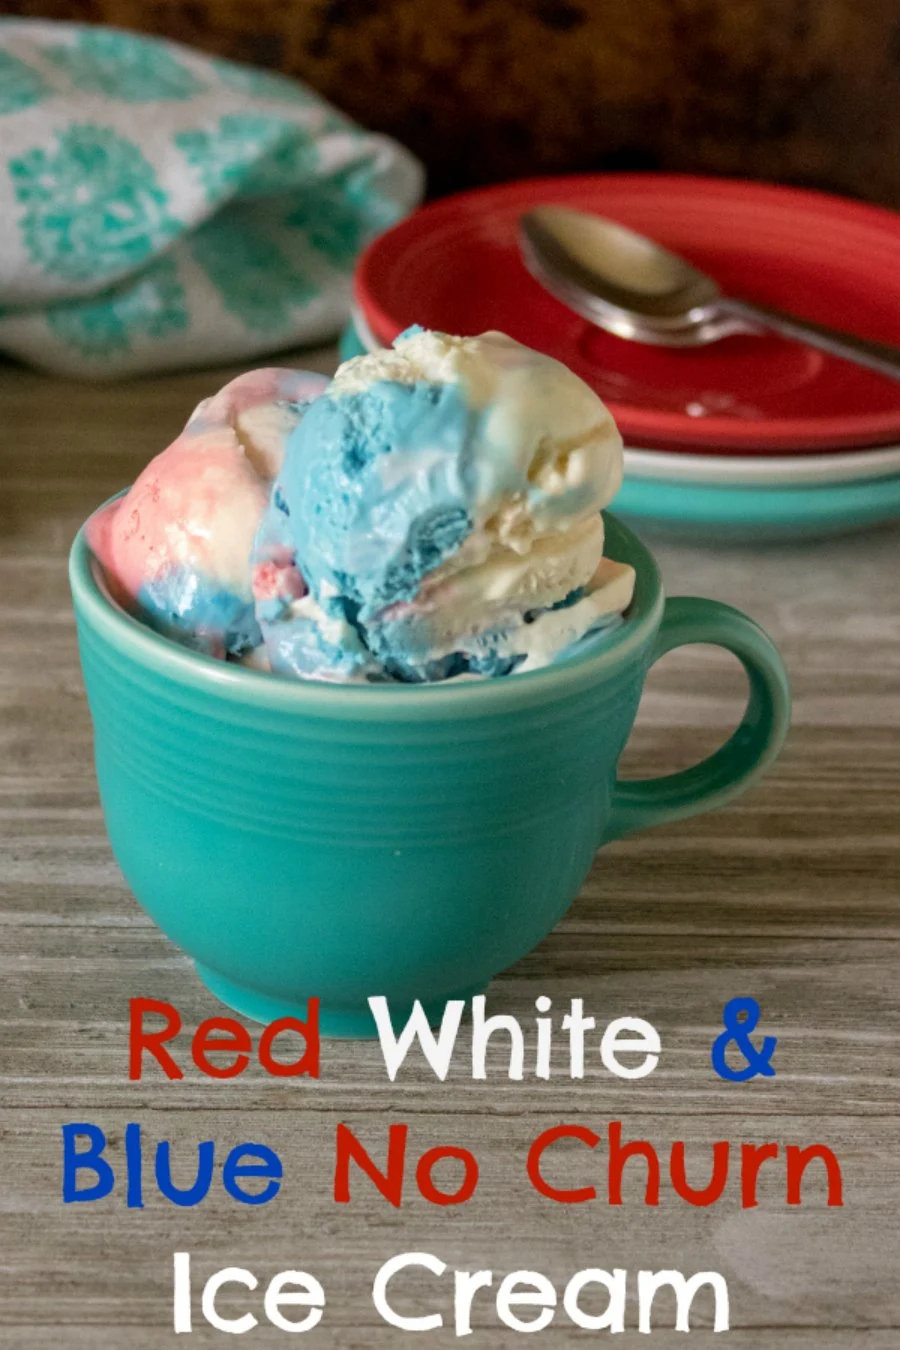 This festive red, white and blue ice cream is easy to make and no-churn so you don’t even need an ice cream maker!